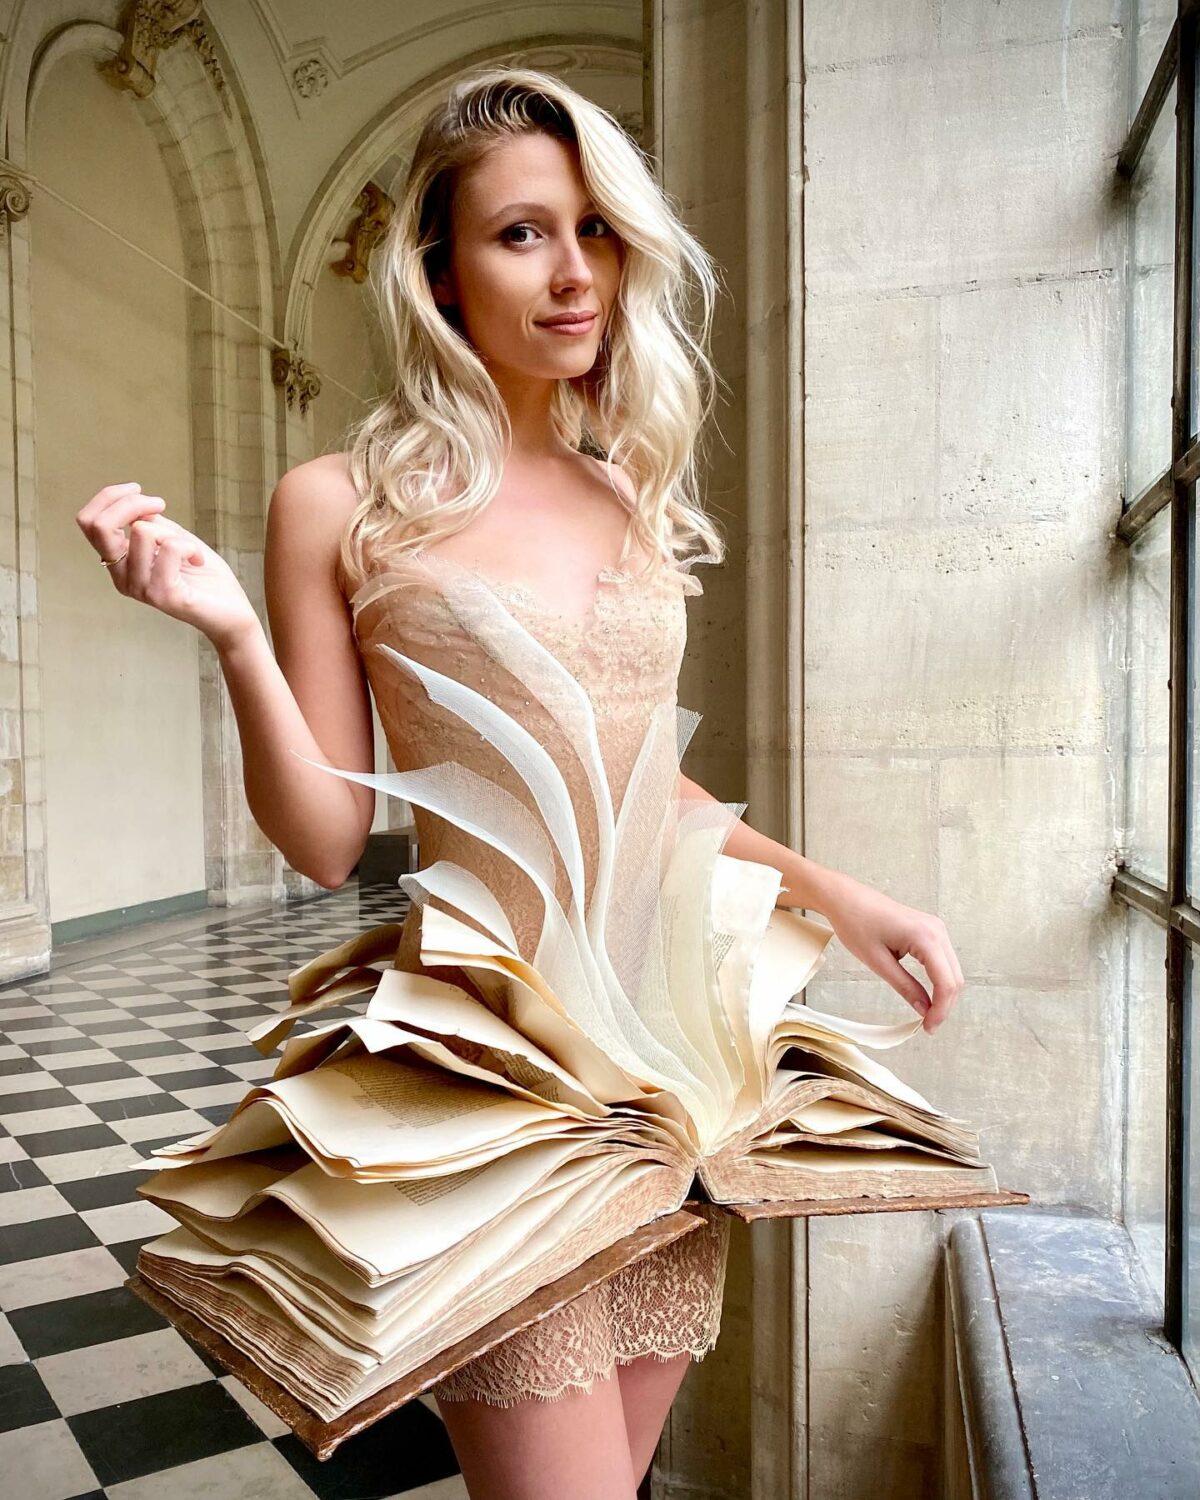 The most creative dresses you’ve ever seen designed by Sylvie Facon